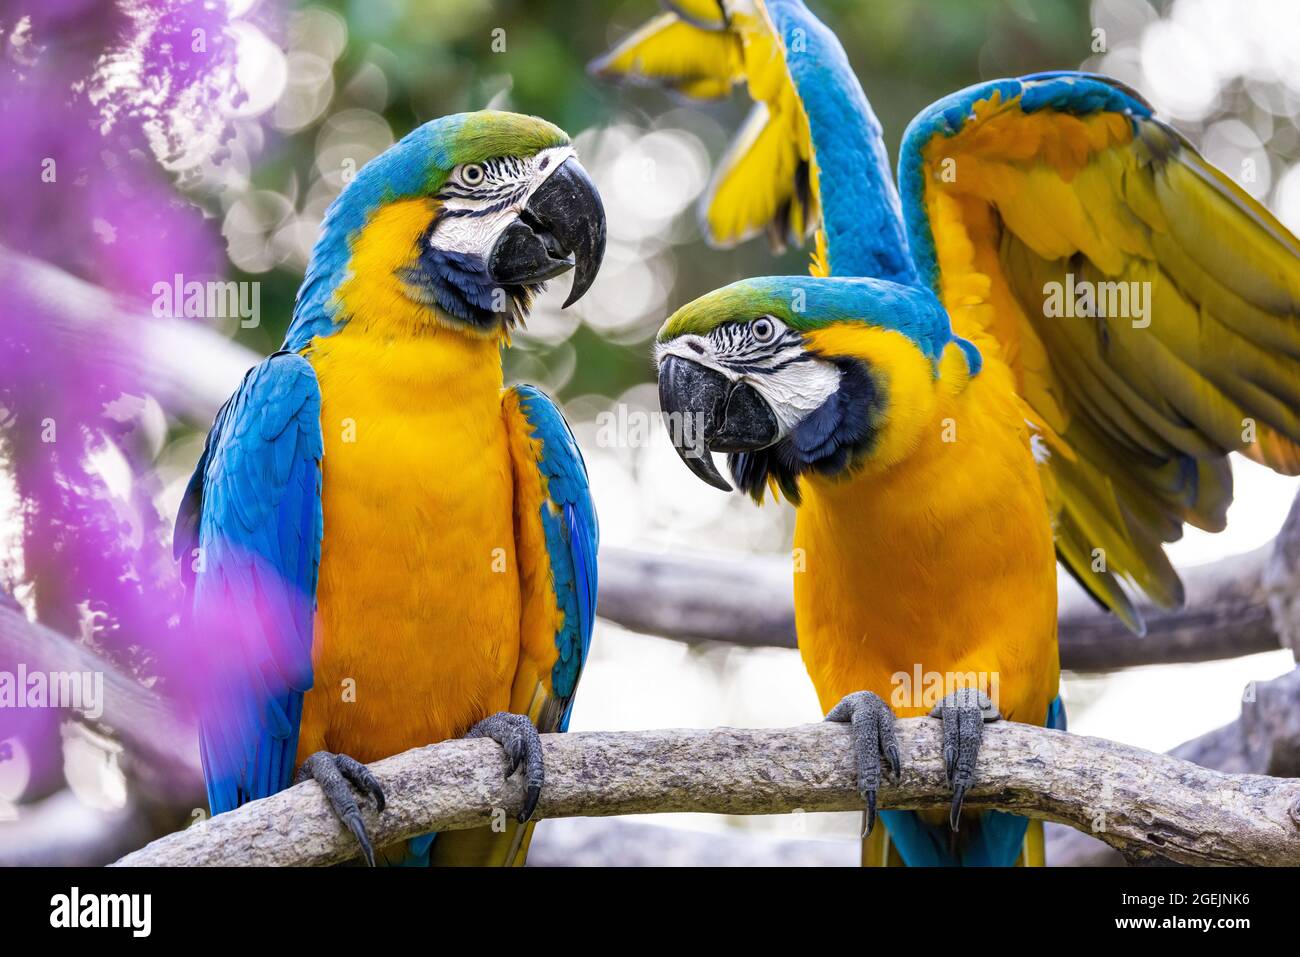 Portrait of two colorful yellow and blue macaws, one of whom is fluttering, perched on a branch, against a bokeh background Stock Photo